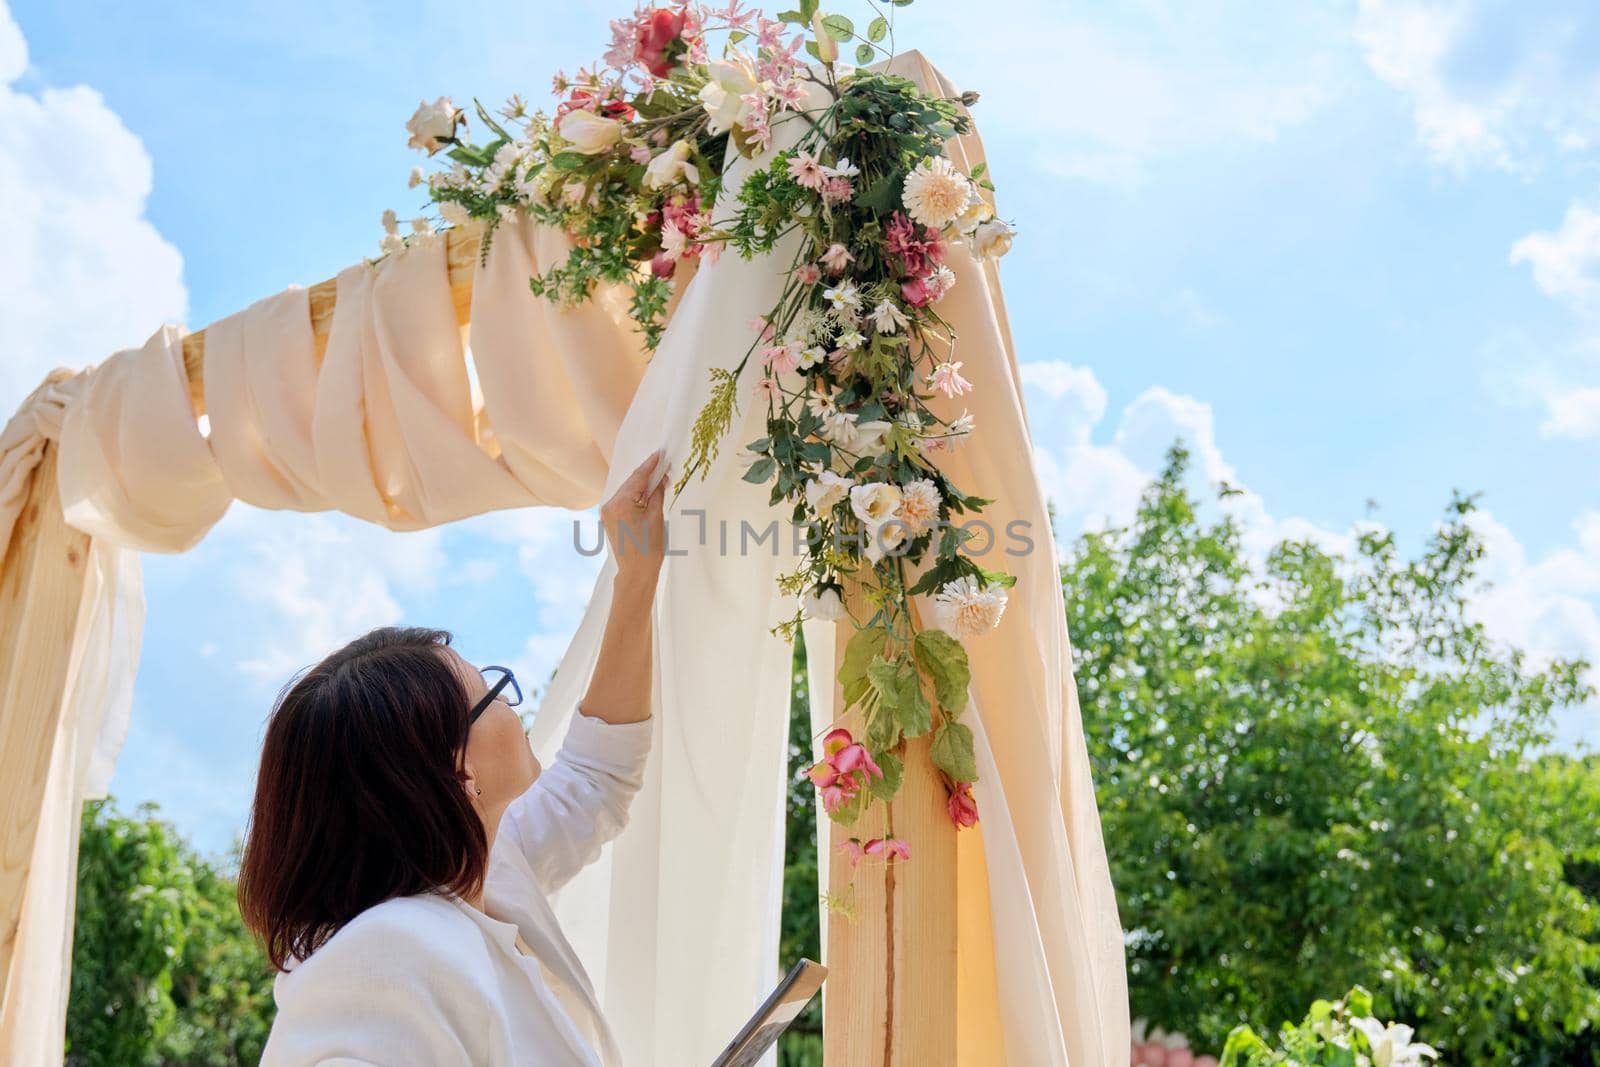 Decorating arch with textiles with flowers and plants. Woman organizer, owner, with digital tablet near wedding arch by VH-studio